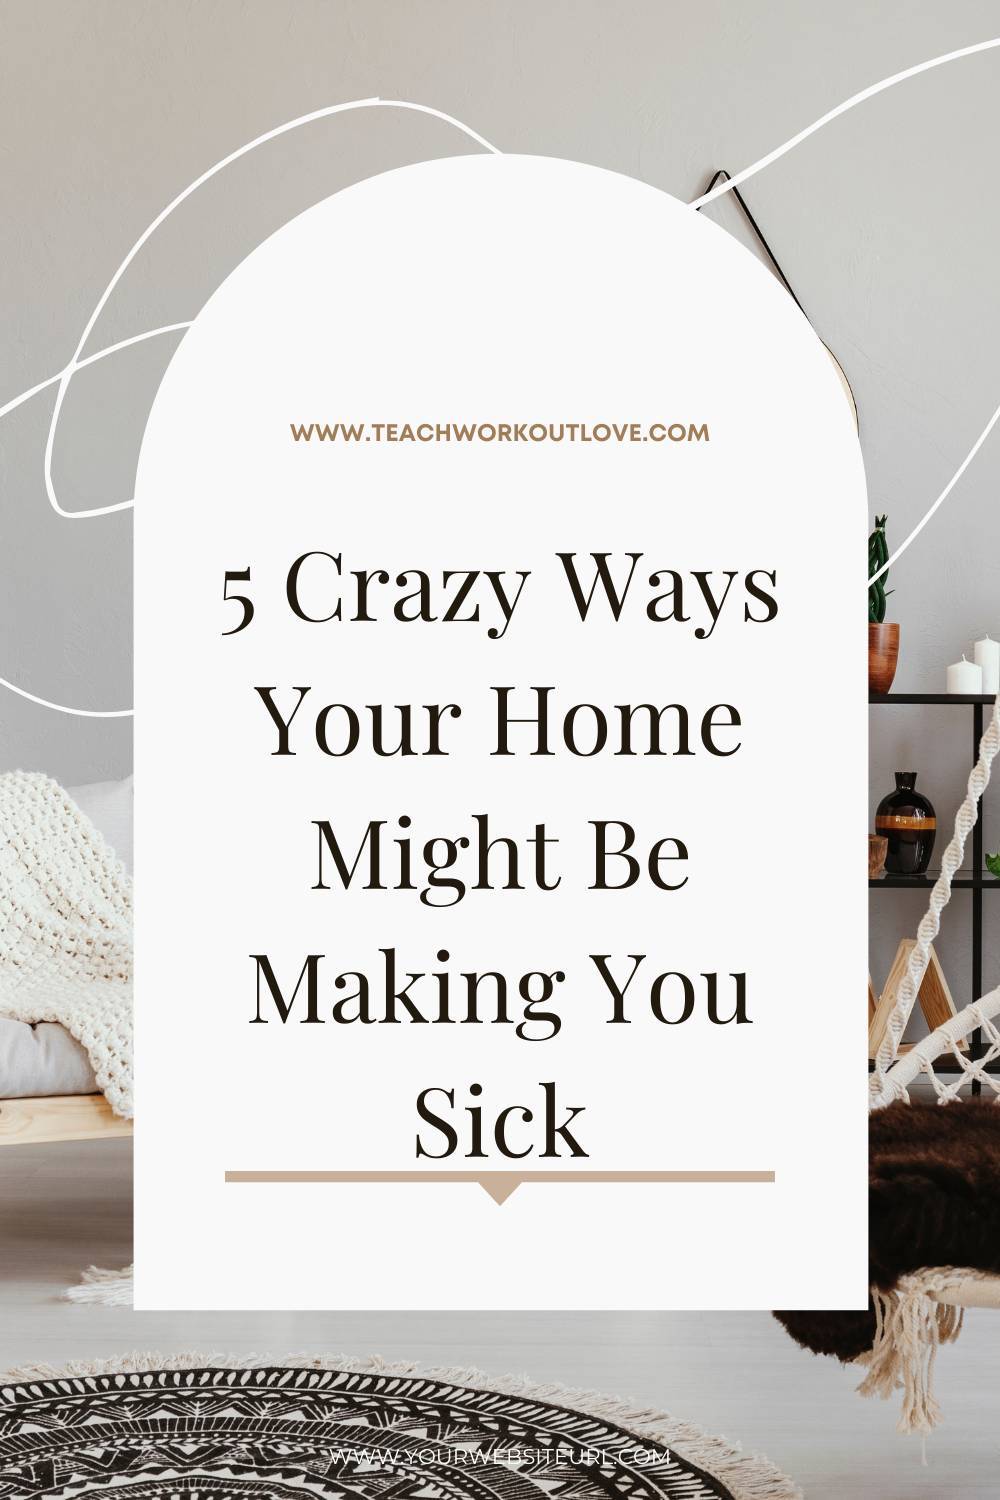 Even though we clean our homes often, there's certain things that we overlook. Here are some items in our home that might be making us sick.